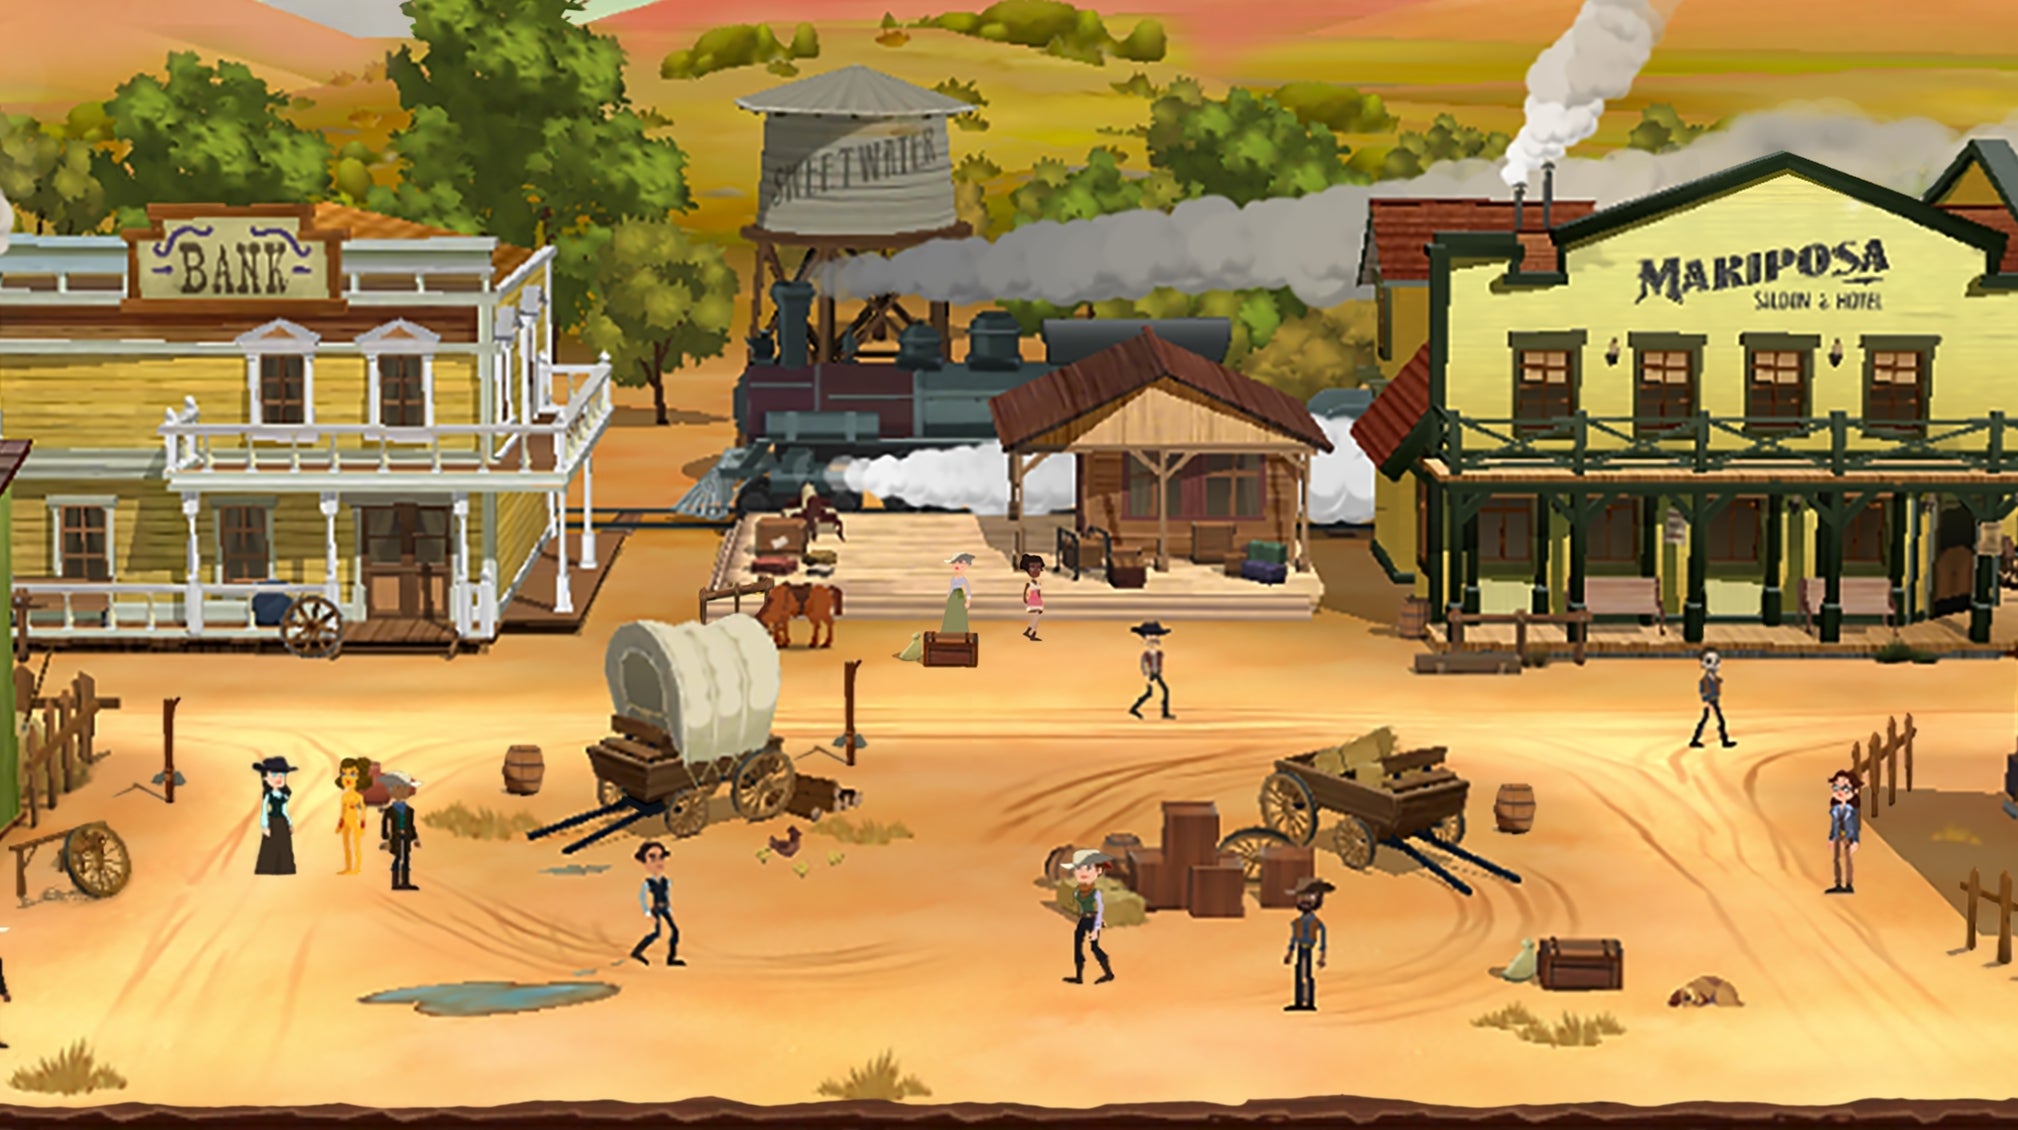 Image for Report: Bethesda sues Warner Bros., claims Westworld game uses Fallout Shelter code